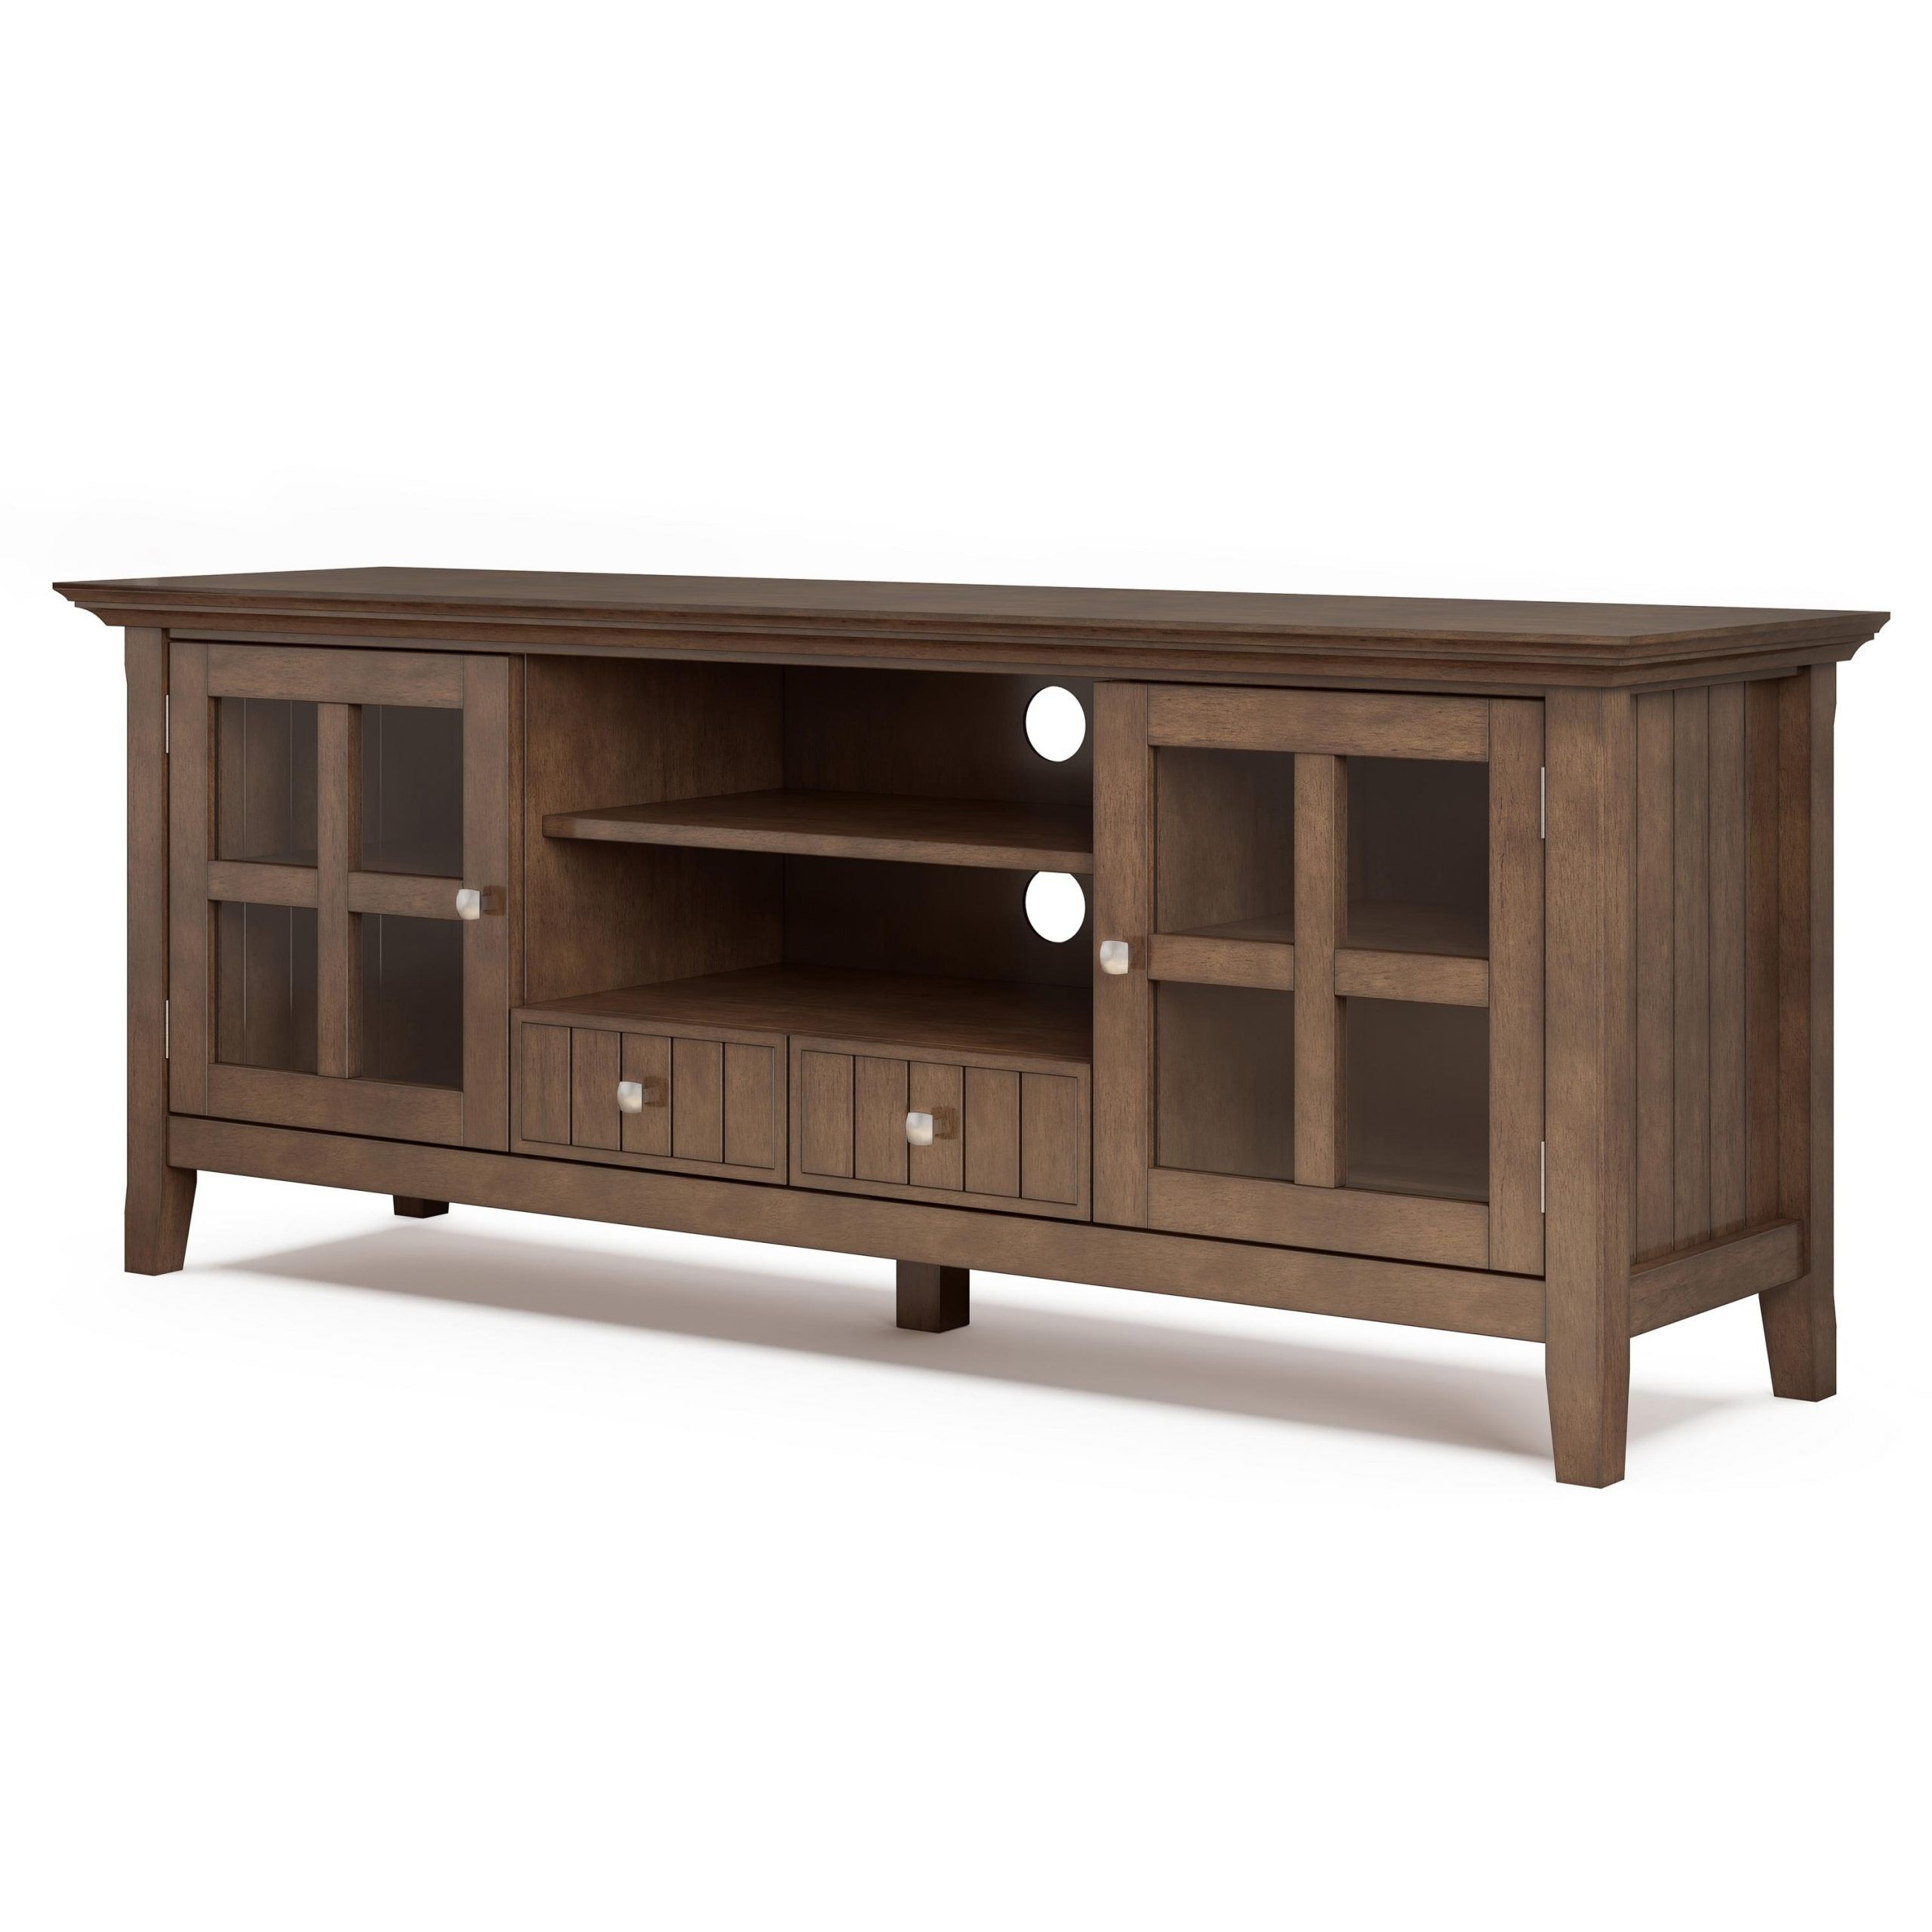 Well Known Tribeca Oak Tv Media Stand In Simpli Home Acadian Solid Wood 60 Inch Wide Rustic Tv (View 5 of 10)